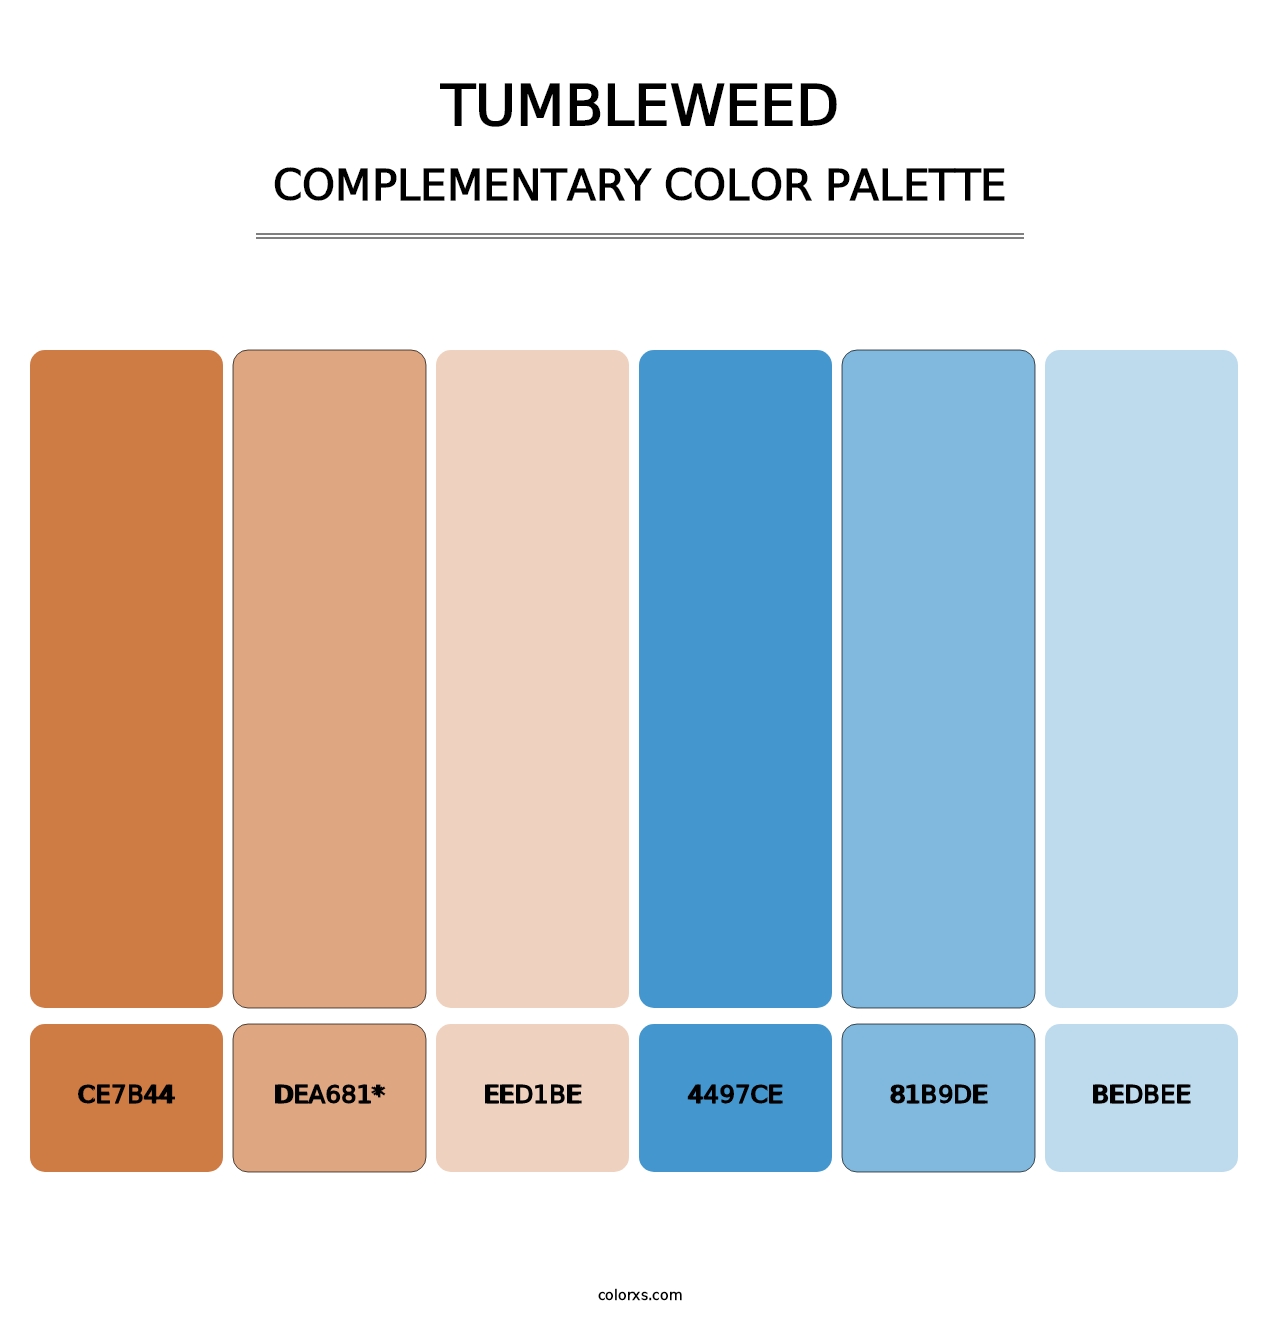 Tumbleweed - Complementary Color Palette